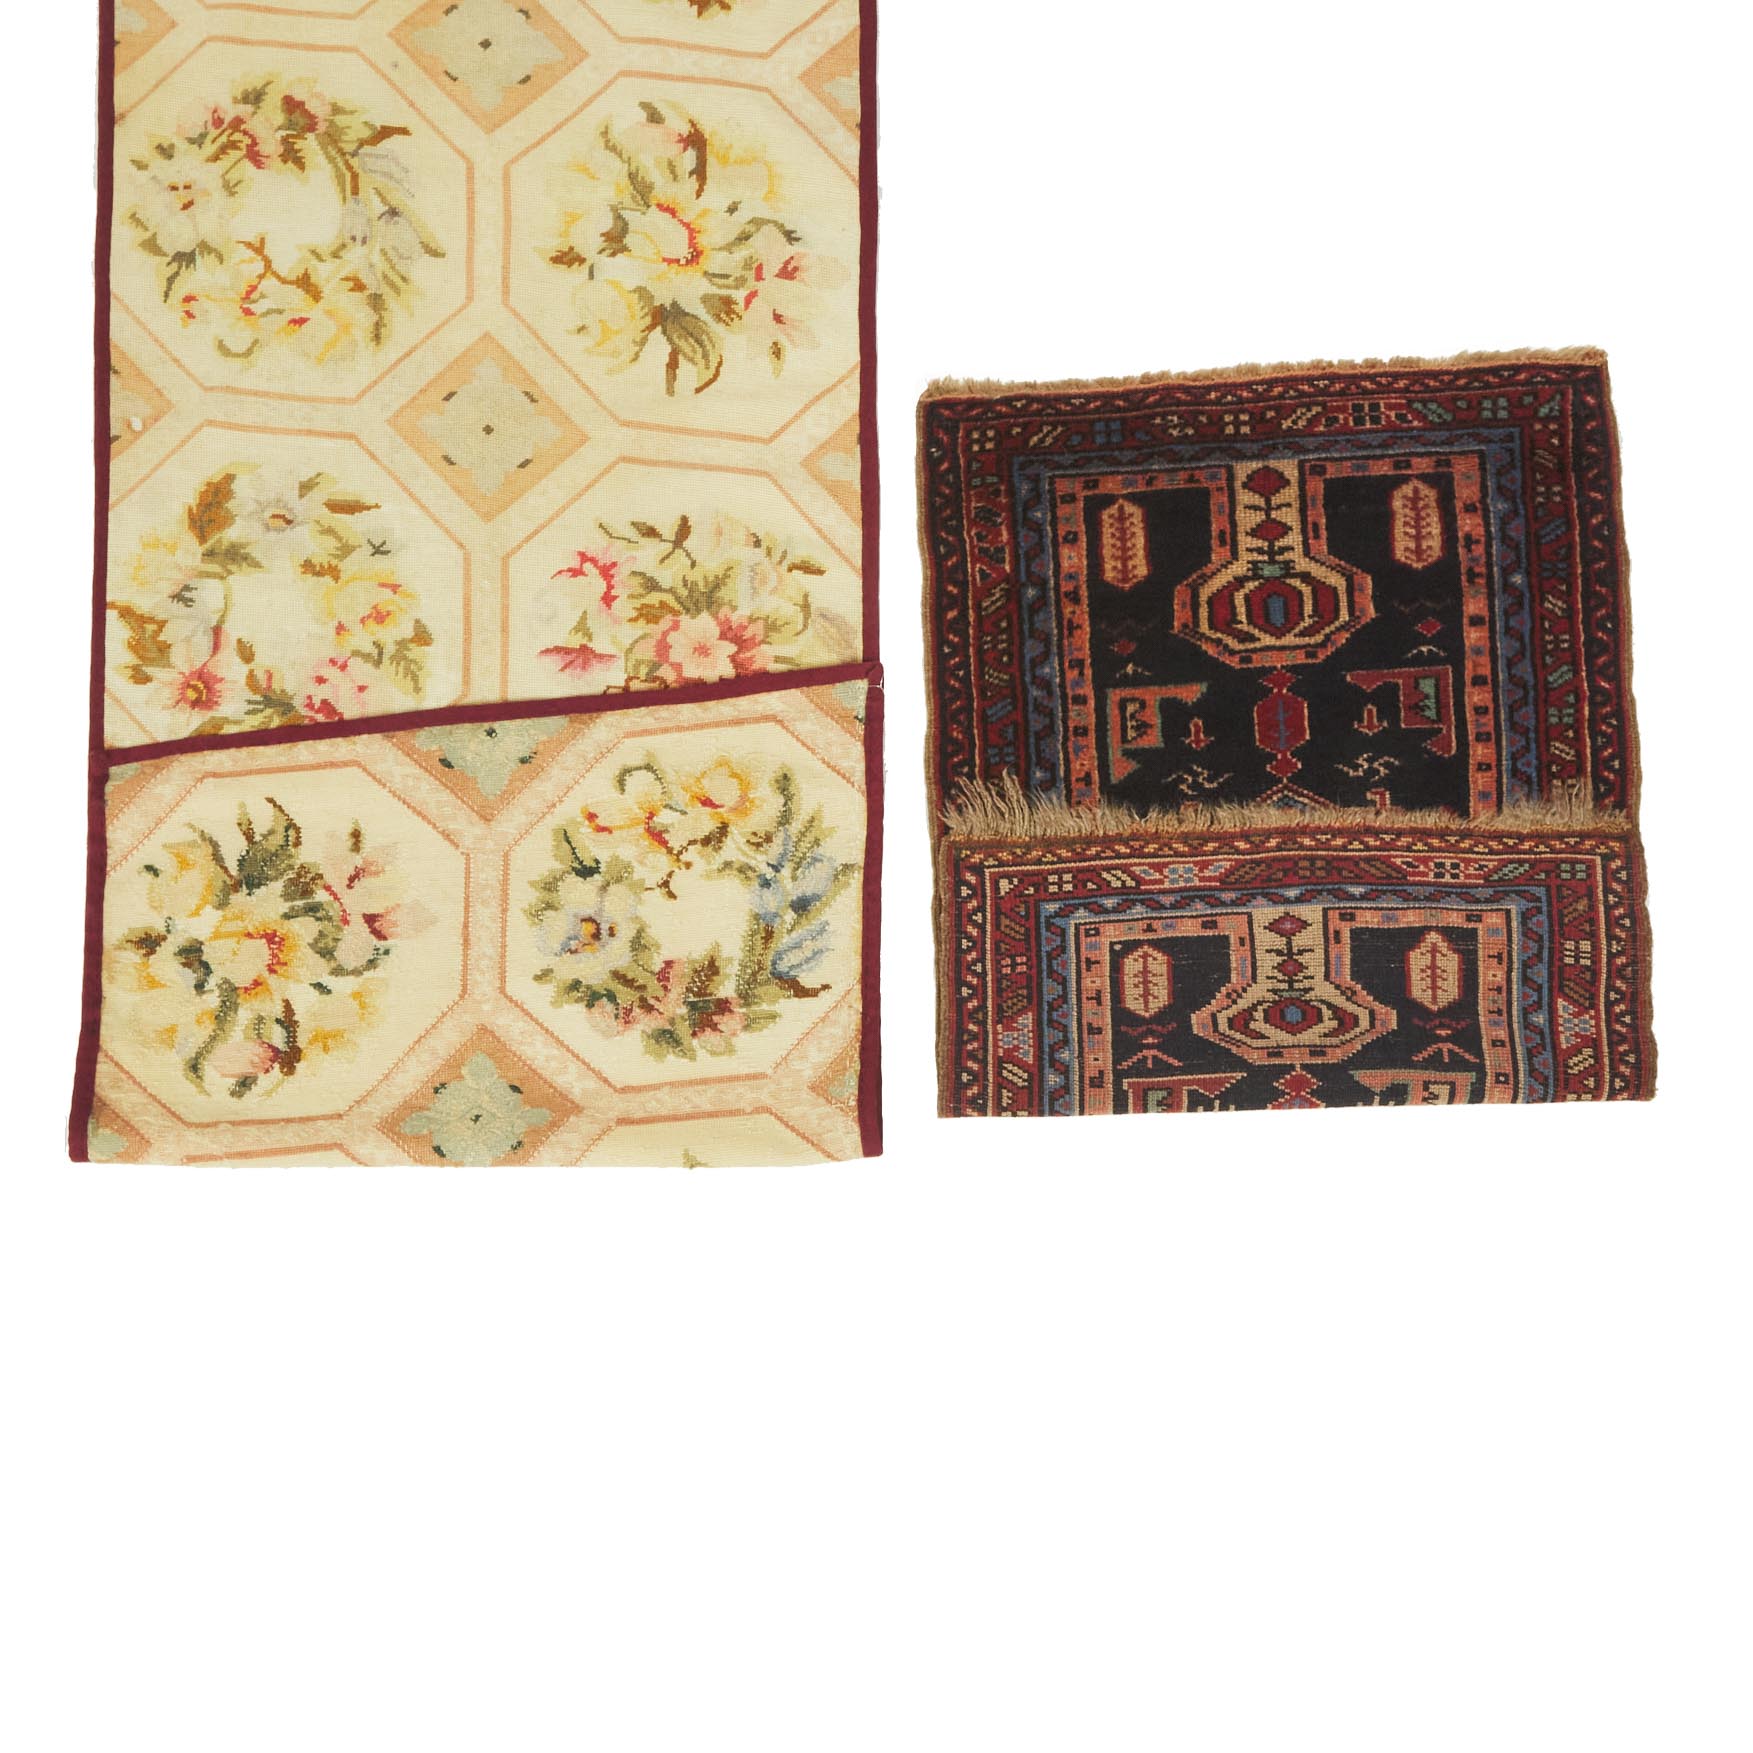 Turkish Bergama Mat, c.1920 together with a Aubusson Needlepoint Fragment, c.1960